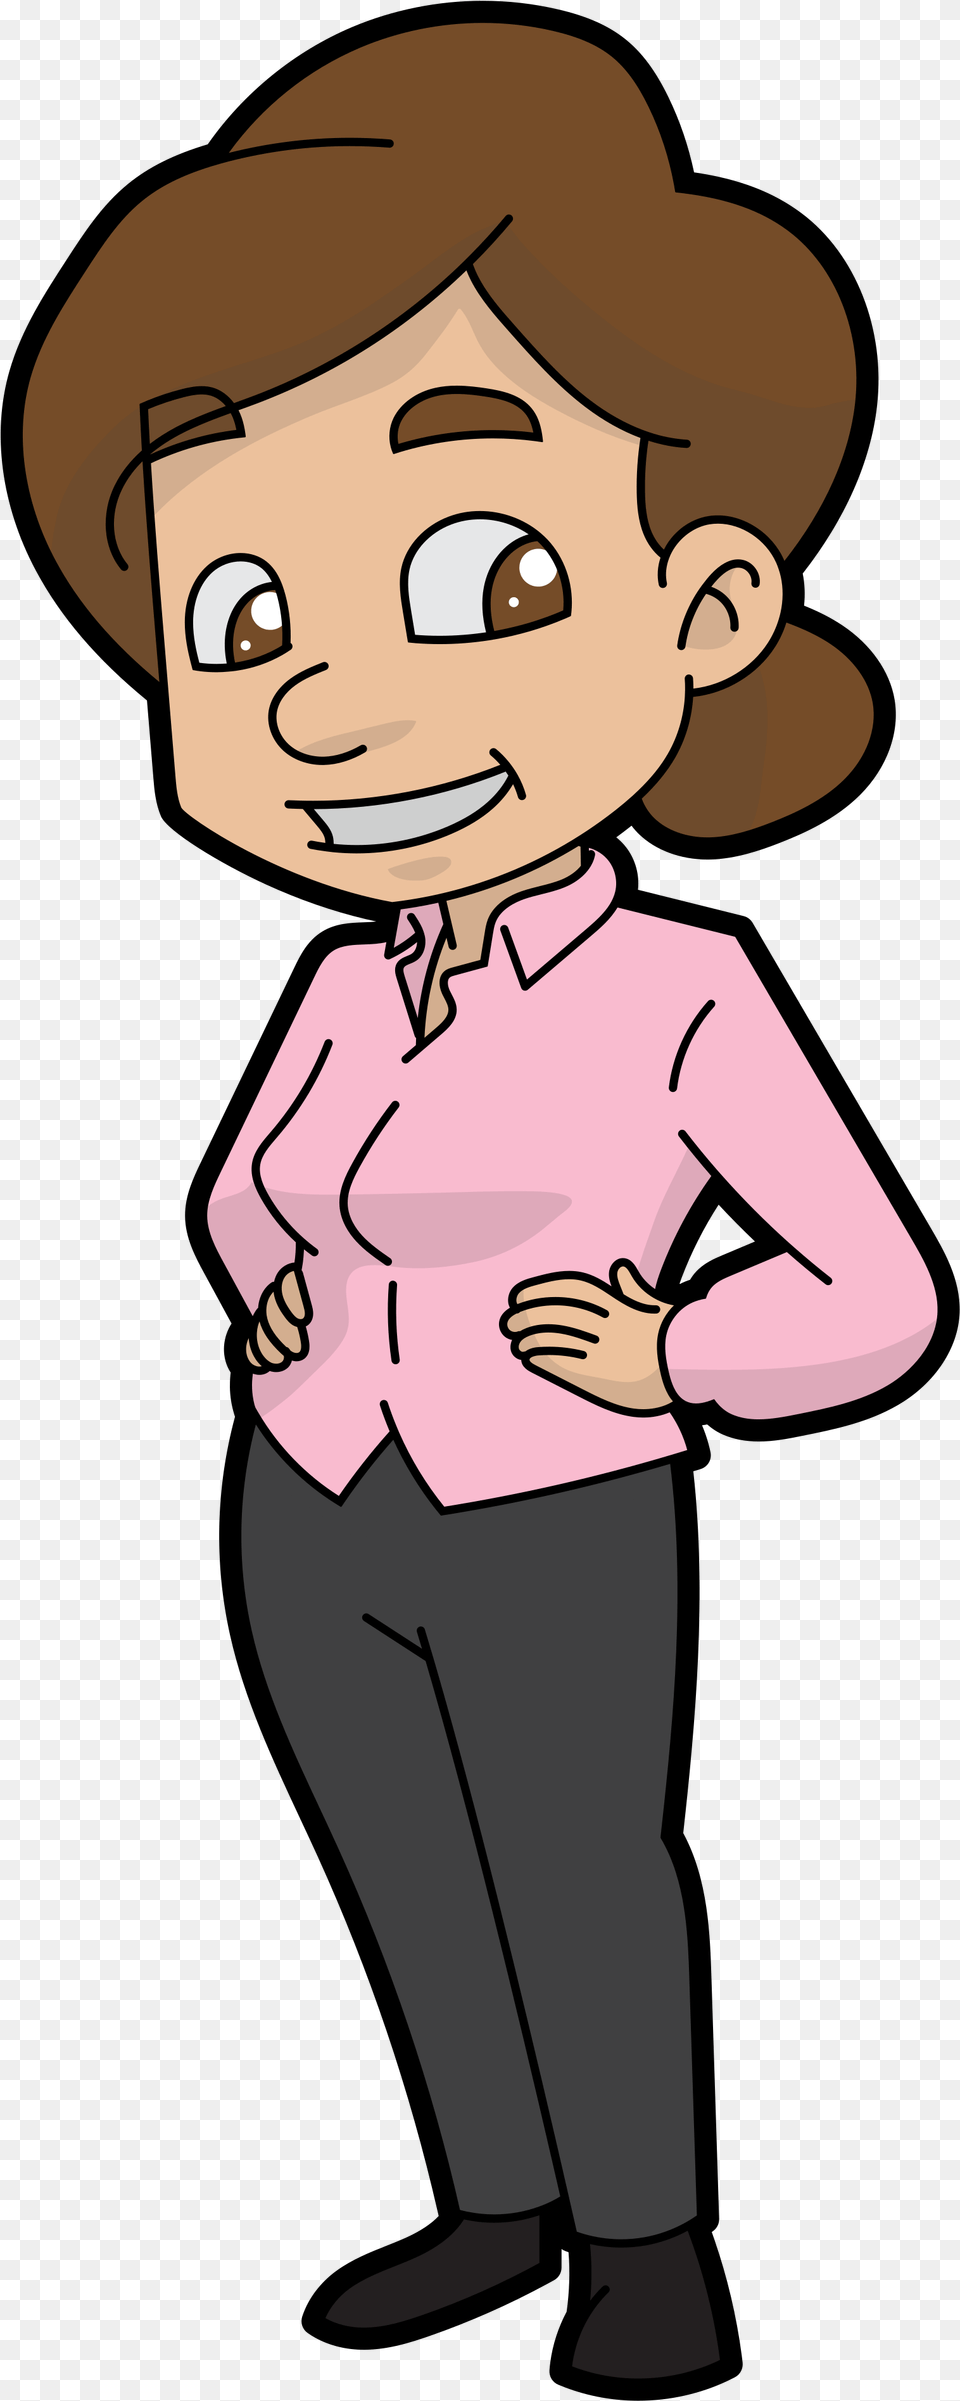 Thumb Cartoon Pictures Of Mom, Baby, Person, Book, Comics Free Transparent Png